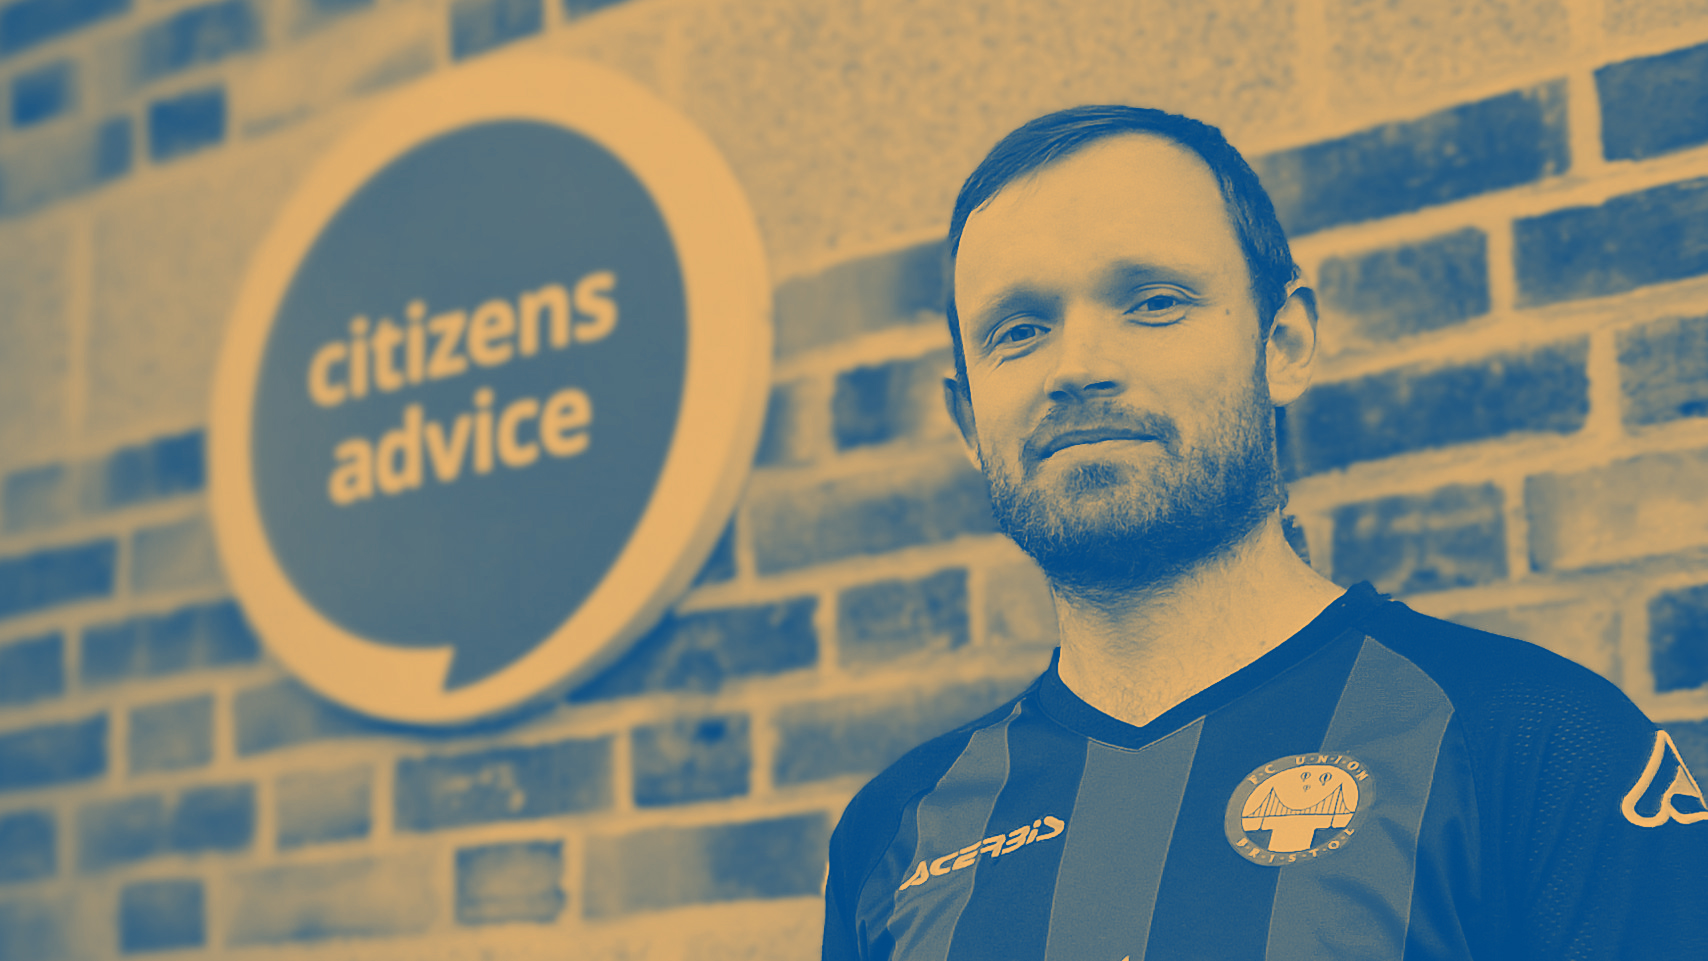 Julien Bristow-Goldschmidt, Help To Claim adviser based at Citizens Advice South Gloucestershire, standing next to the entrance of the charity's office in Yate. He is running the Bristol 10K to raise funds for the charity.